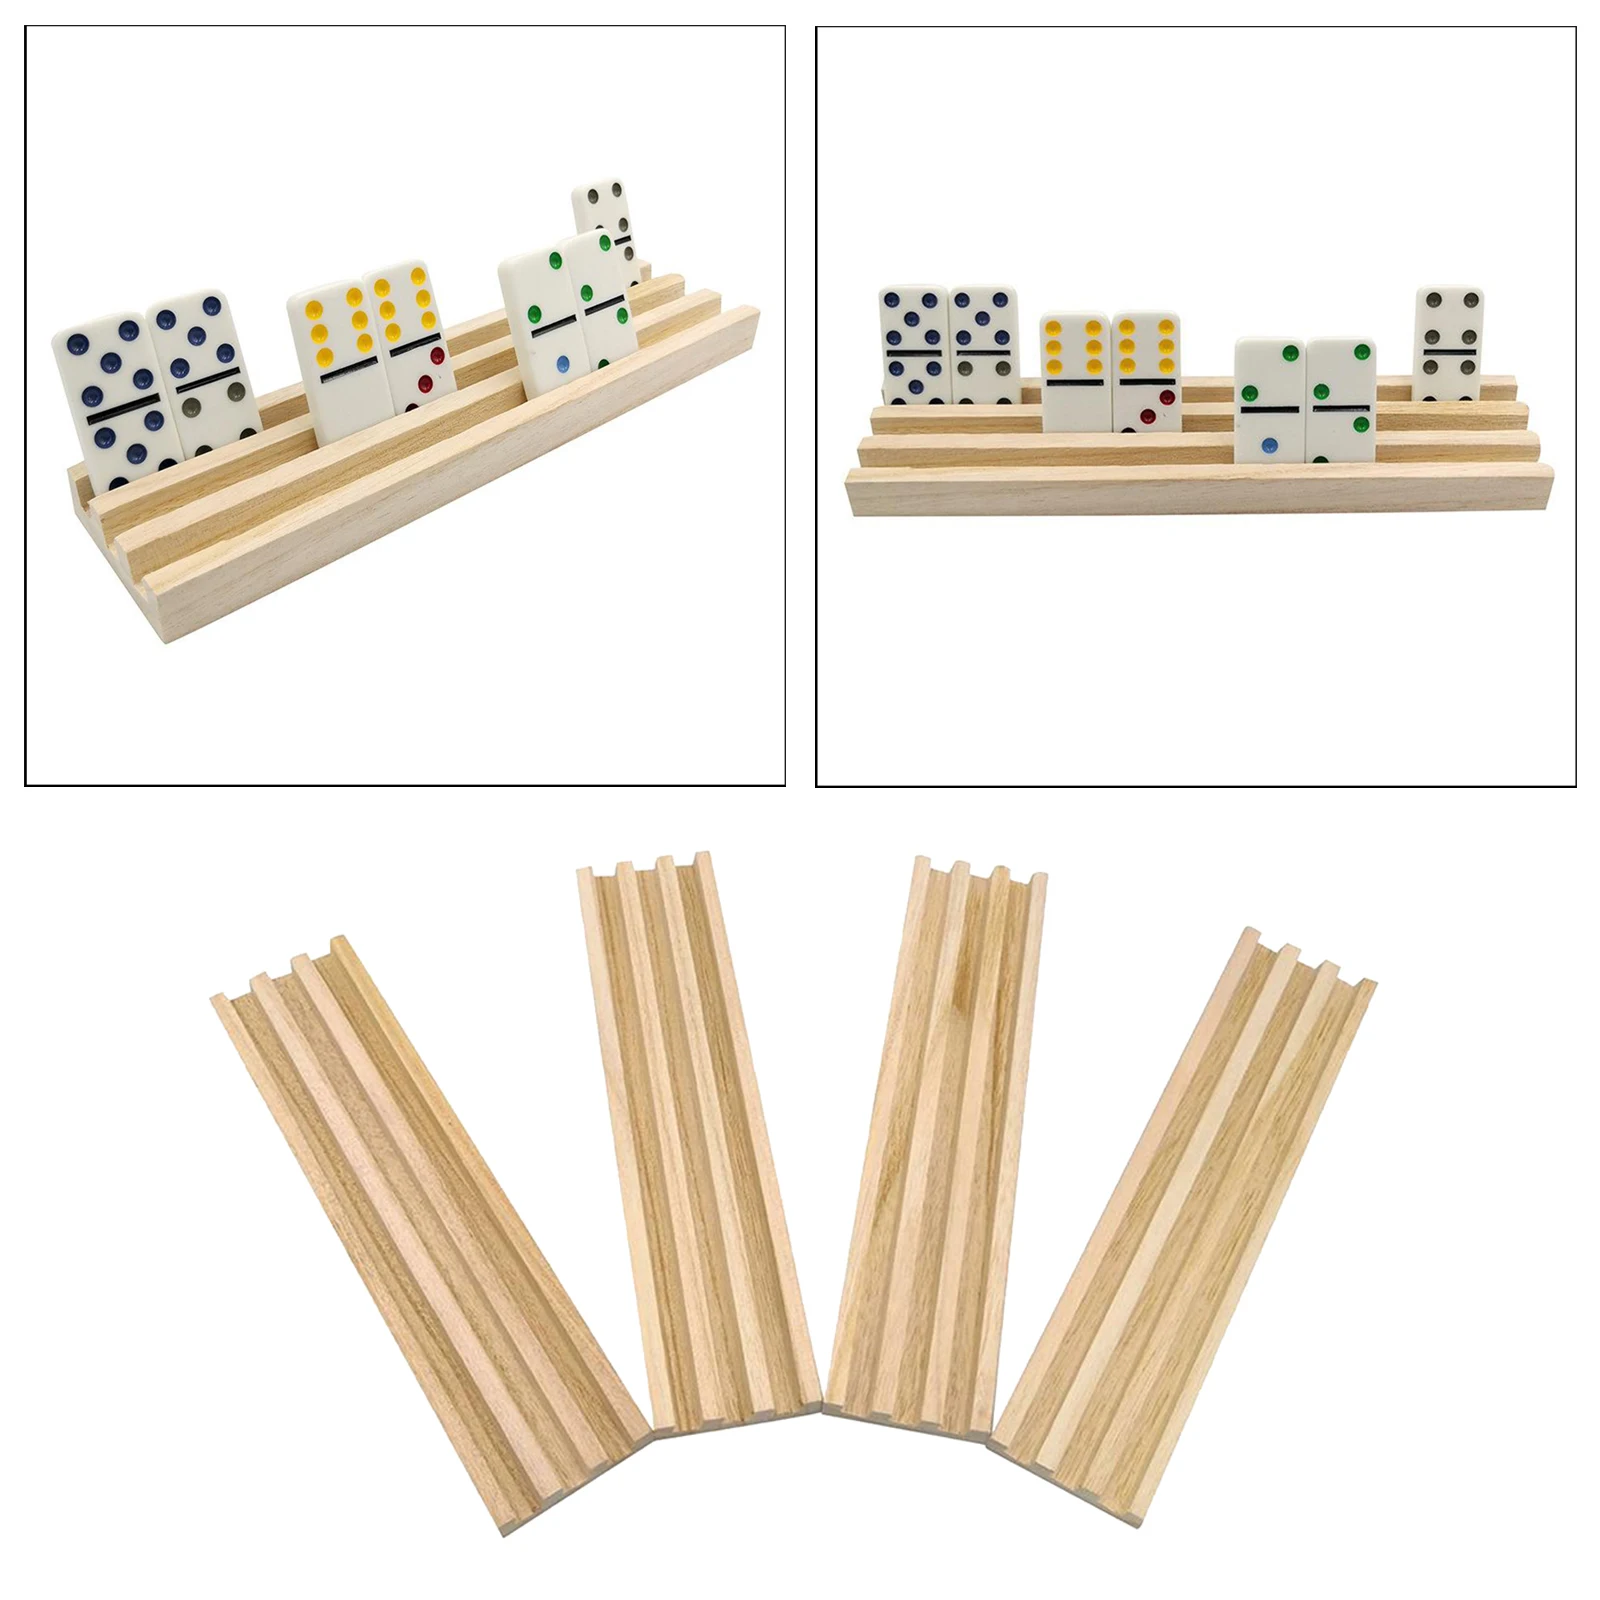 4pcs/set Unpainted Wood Domino Trays Racks Stand for Mahjong Chicken Foot